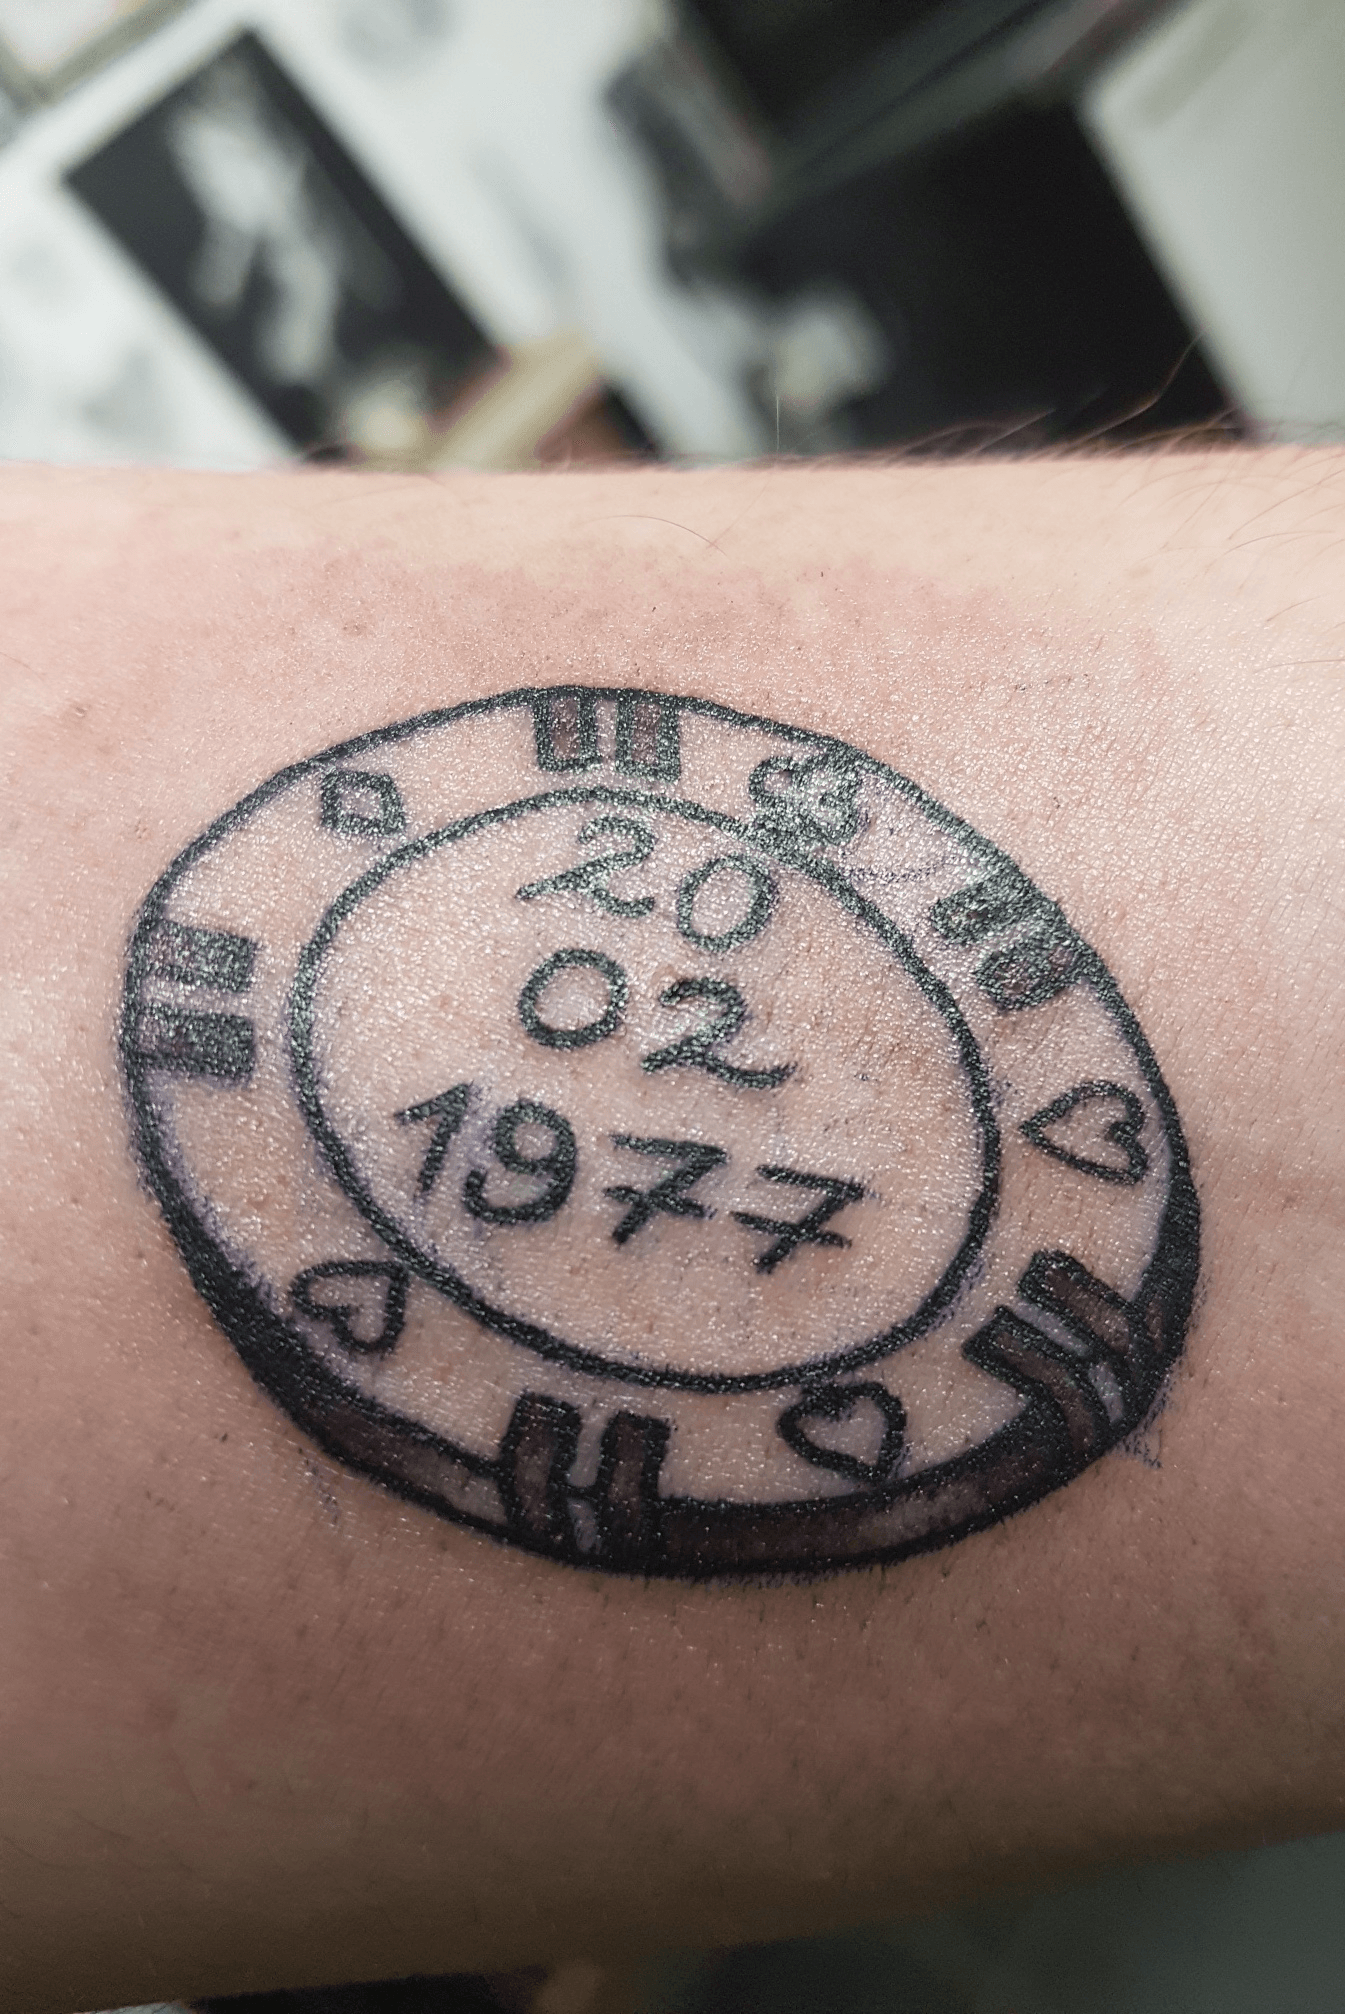 A poker chip in remembrance of my grandpa Done by Matt Skin at Full Moon  Tattoo in Augusta GA  Poker tattoo Chip tattoo Poker chips